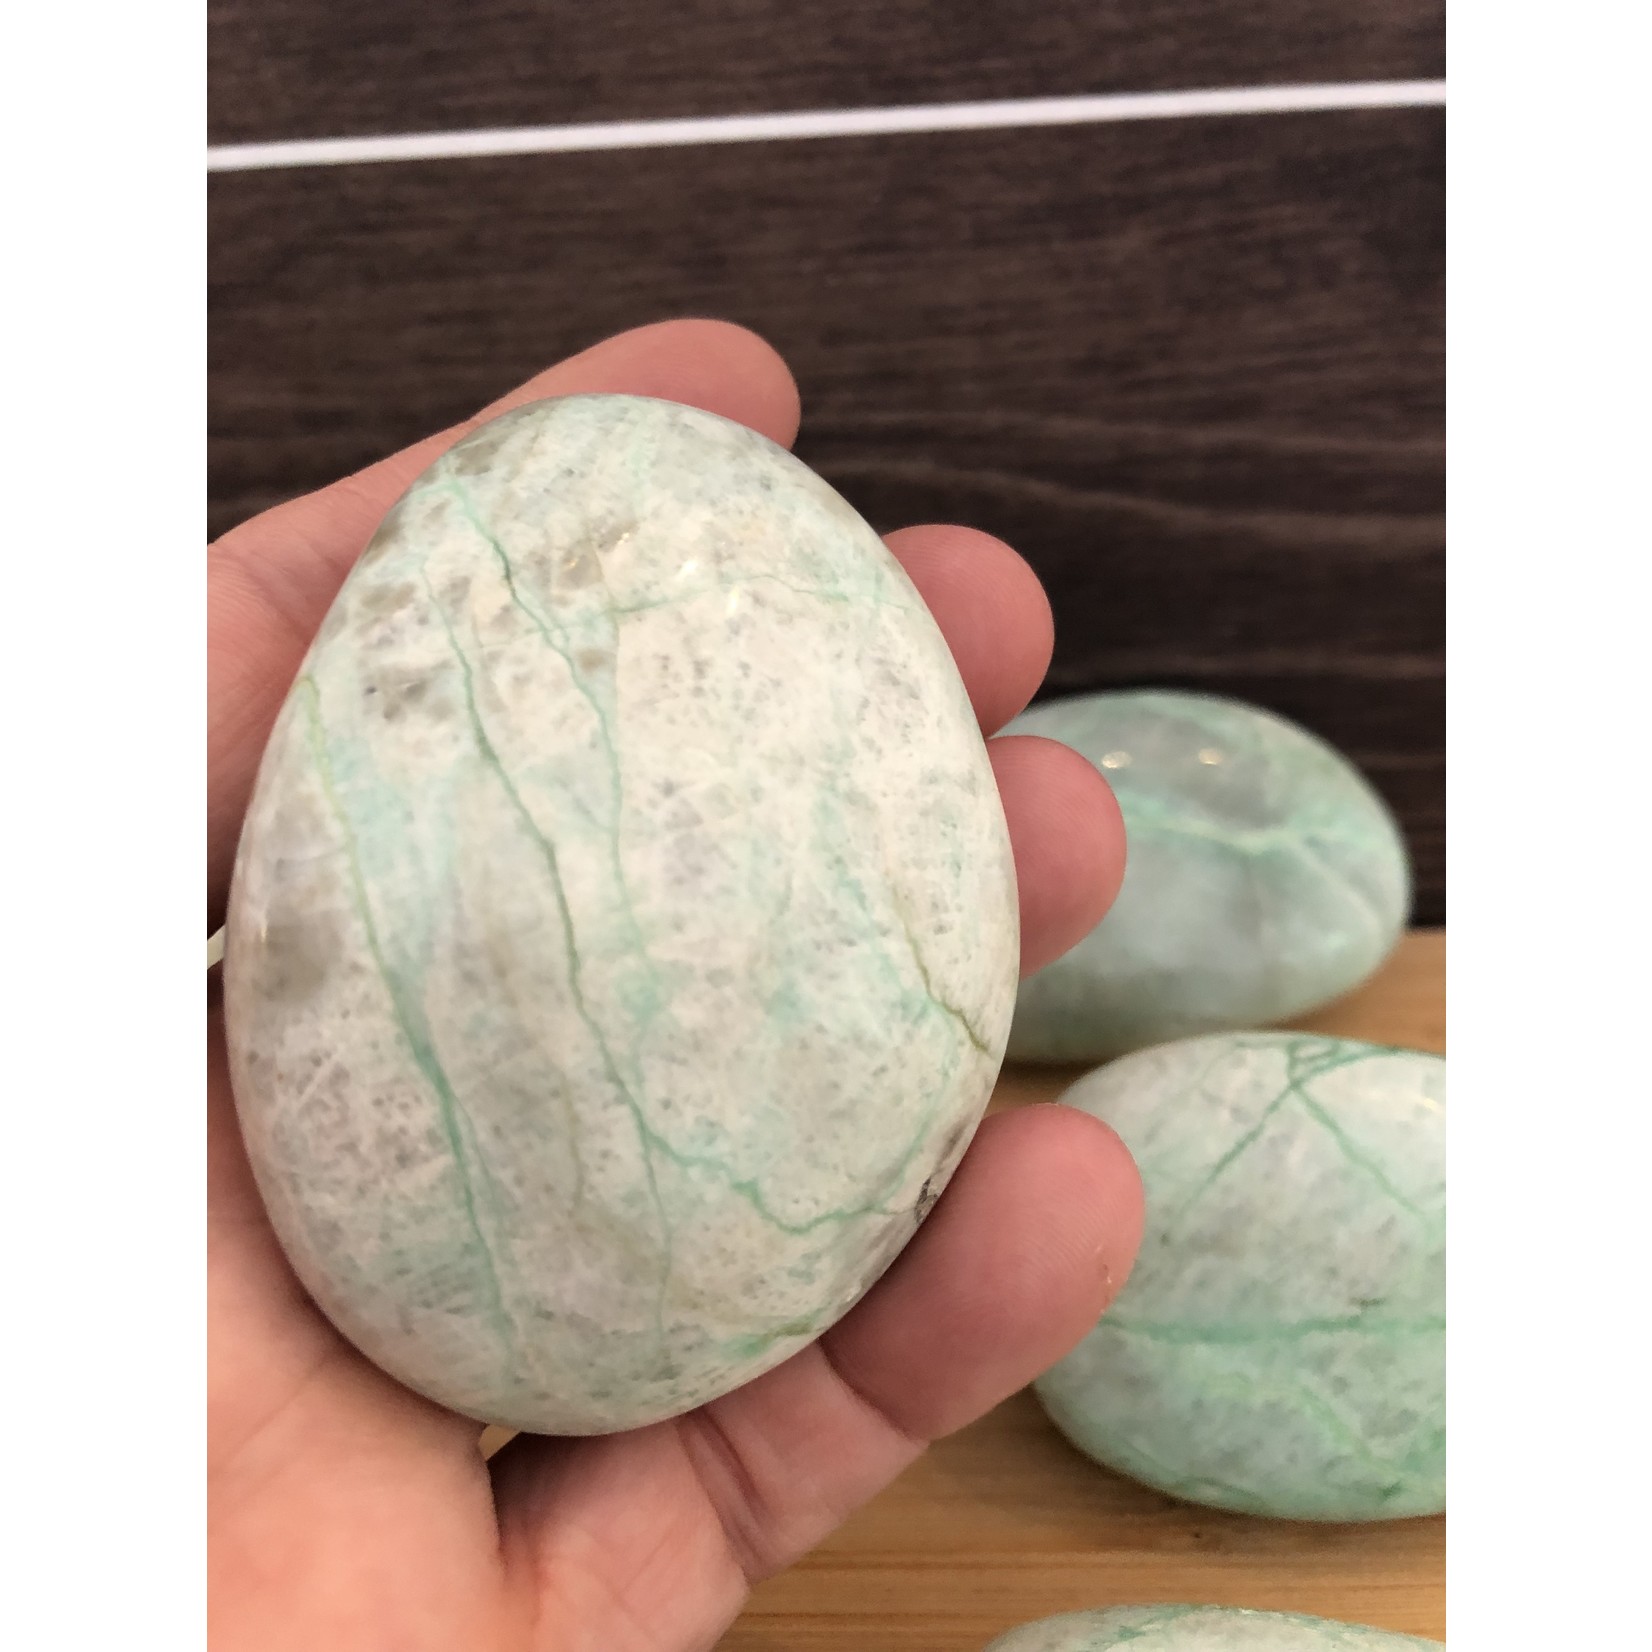 garnierite palm stone, green moonstone worry stone, polished garnierite stone, increases our vibratory frequency